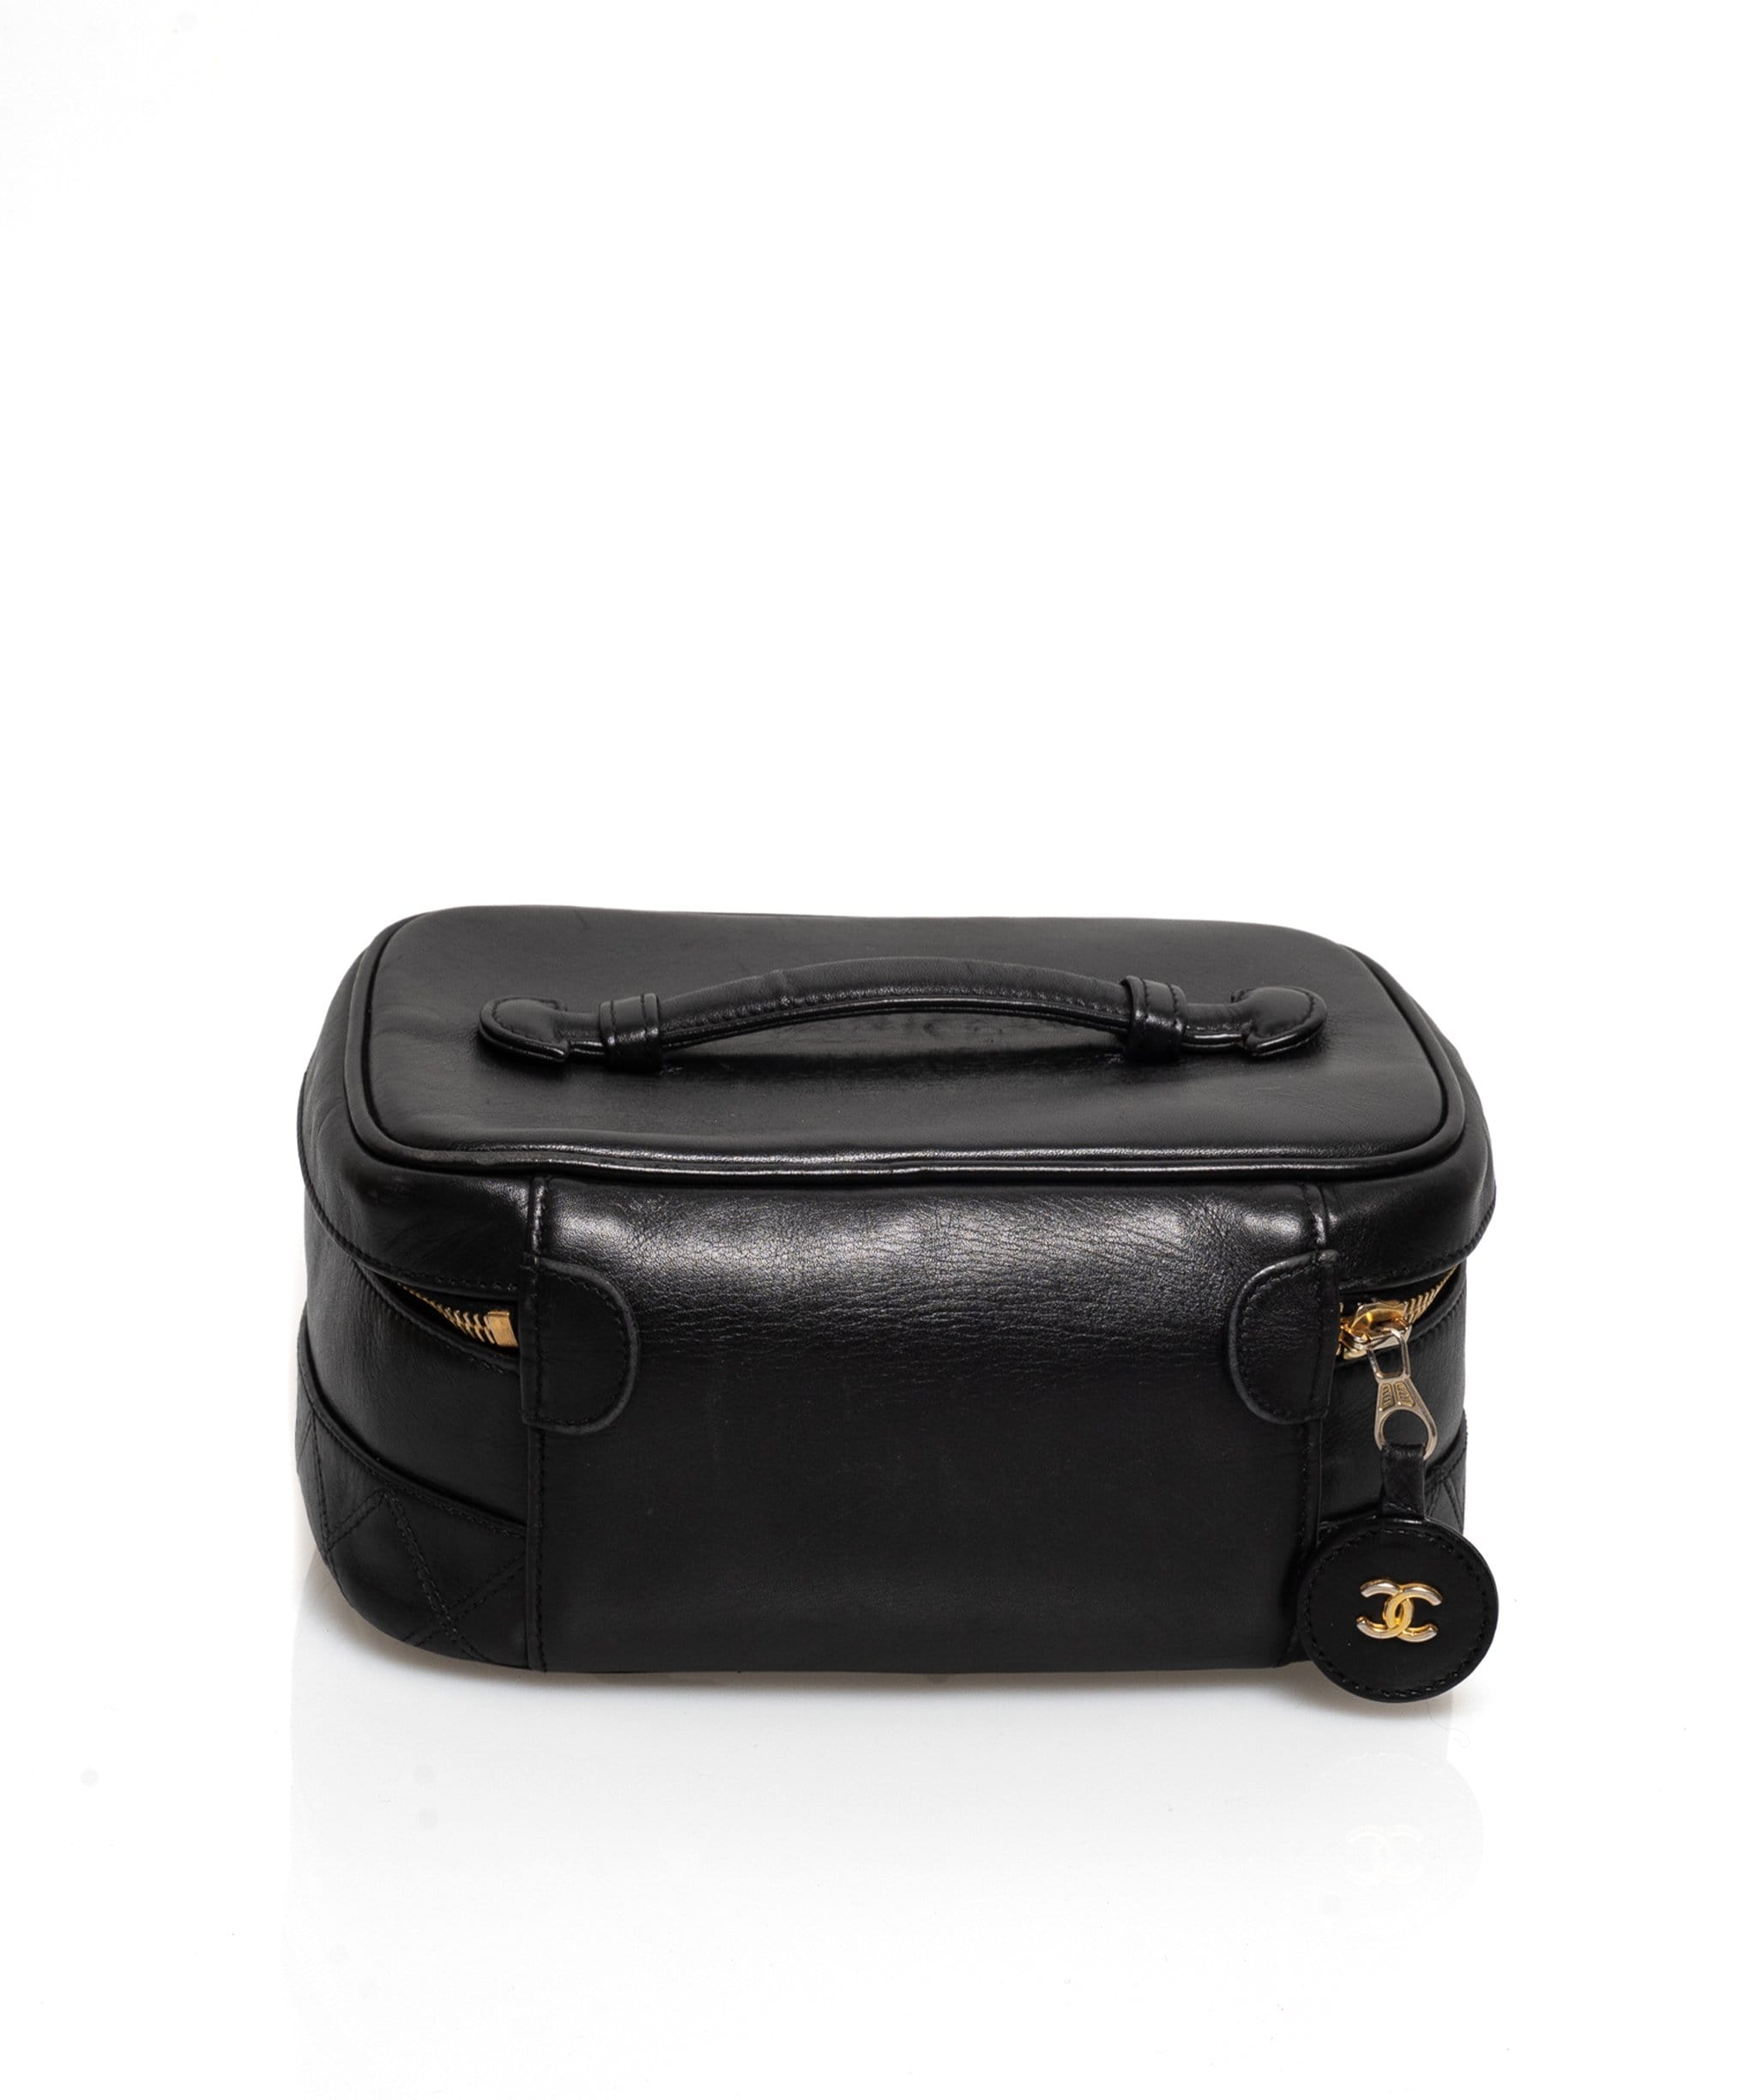 Chanel Chanel Small Vanity Case Top Handle Bag - AWL1277